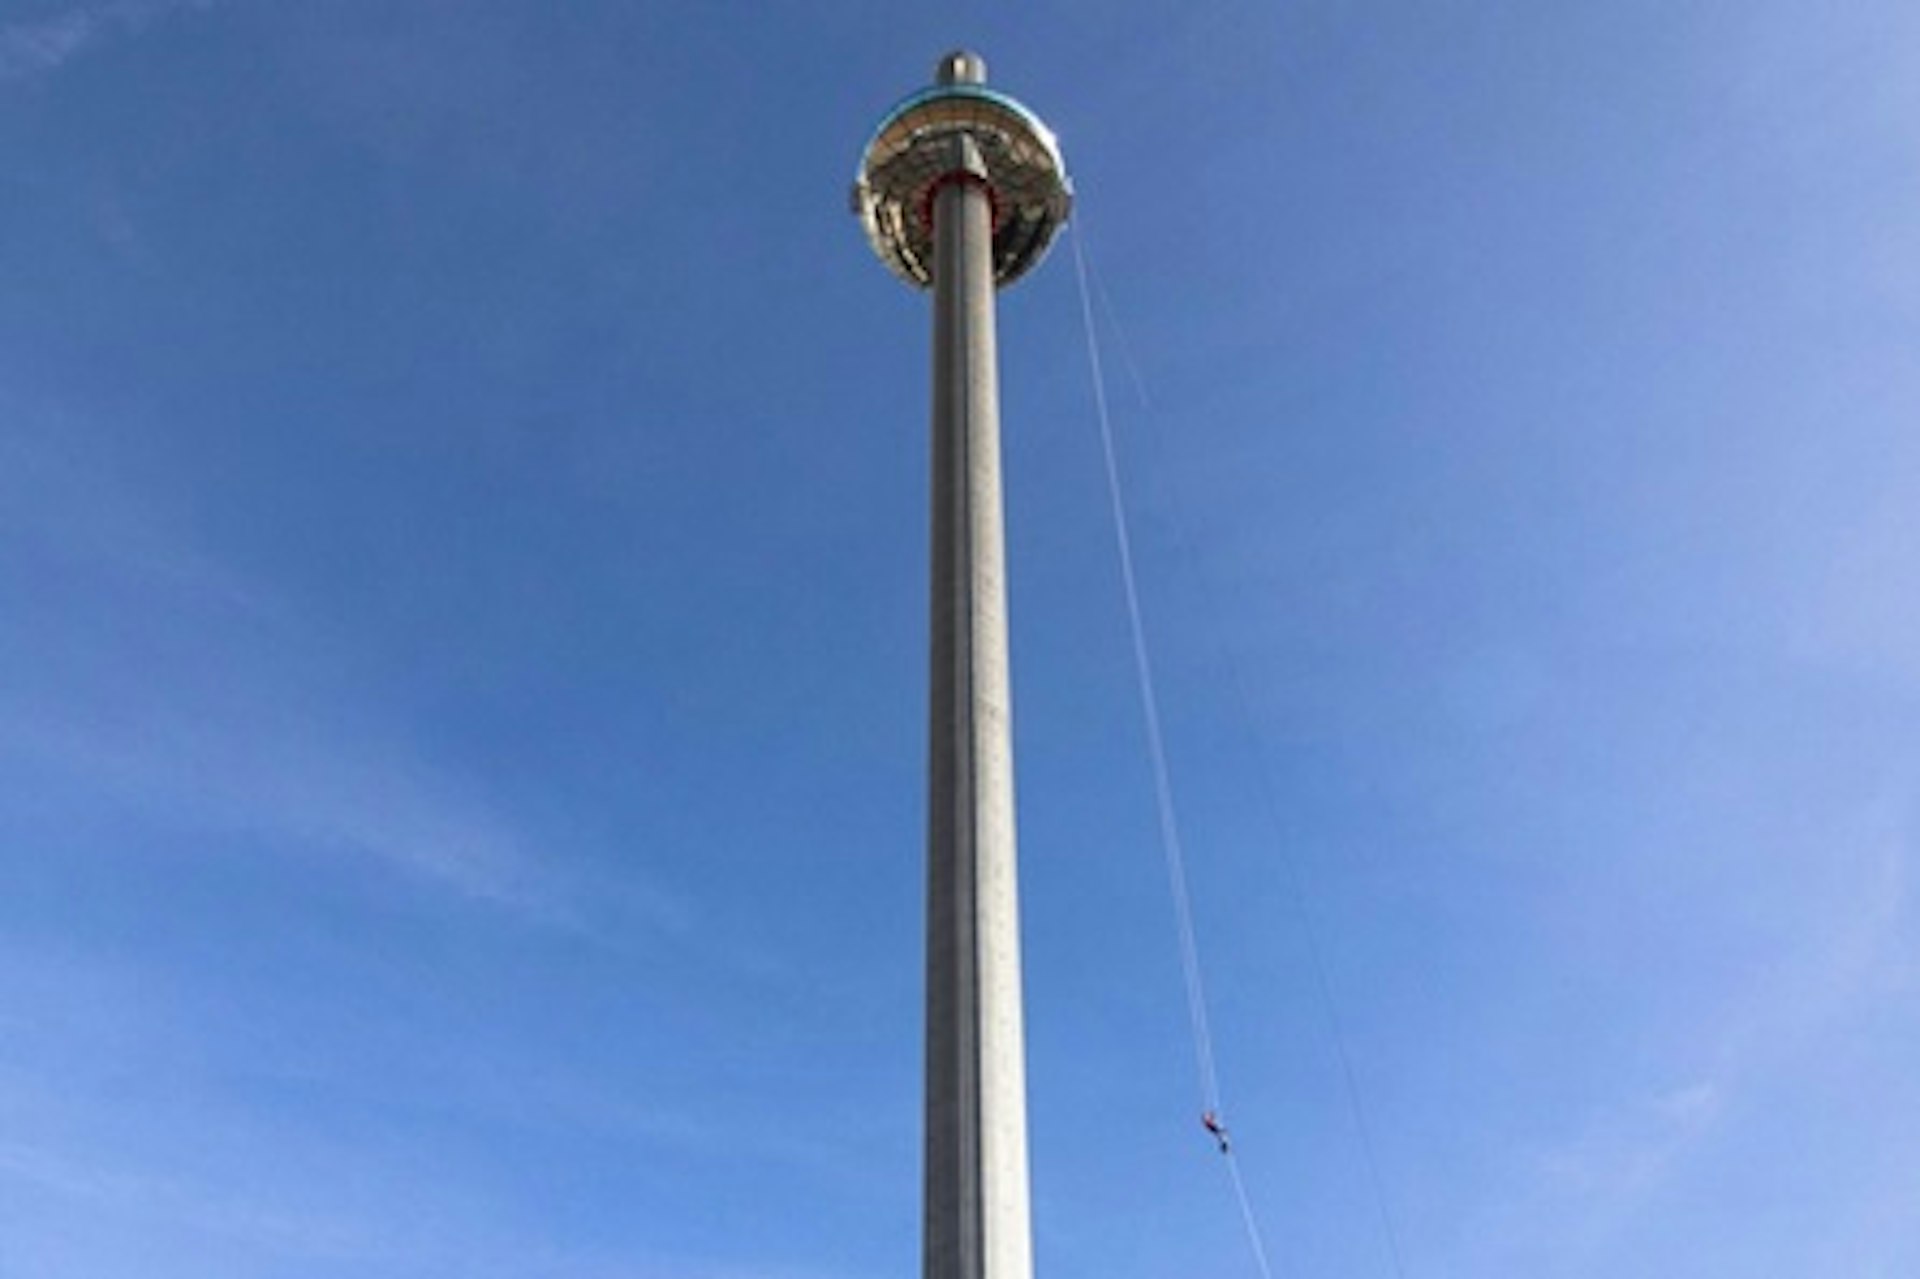 iDrop Abseil Experience at the British Airways i360 for Two